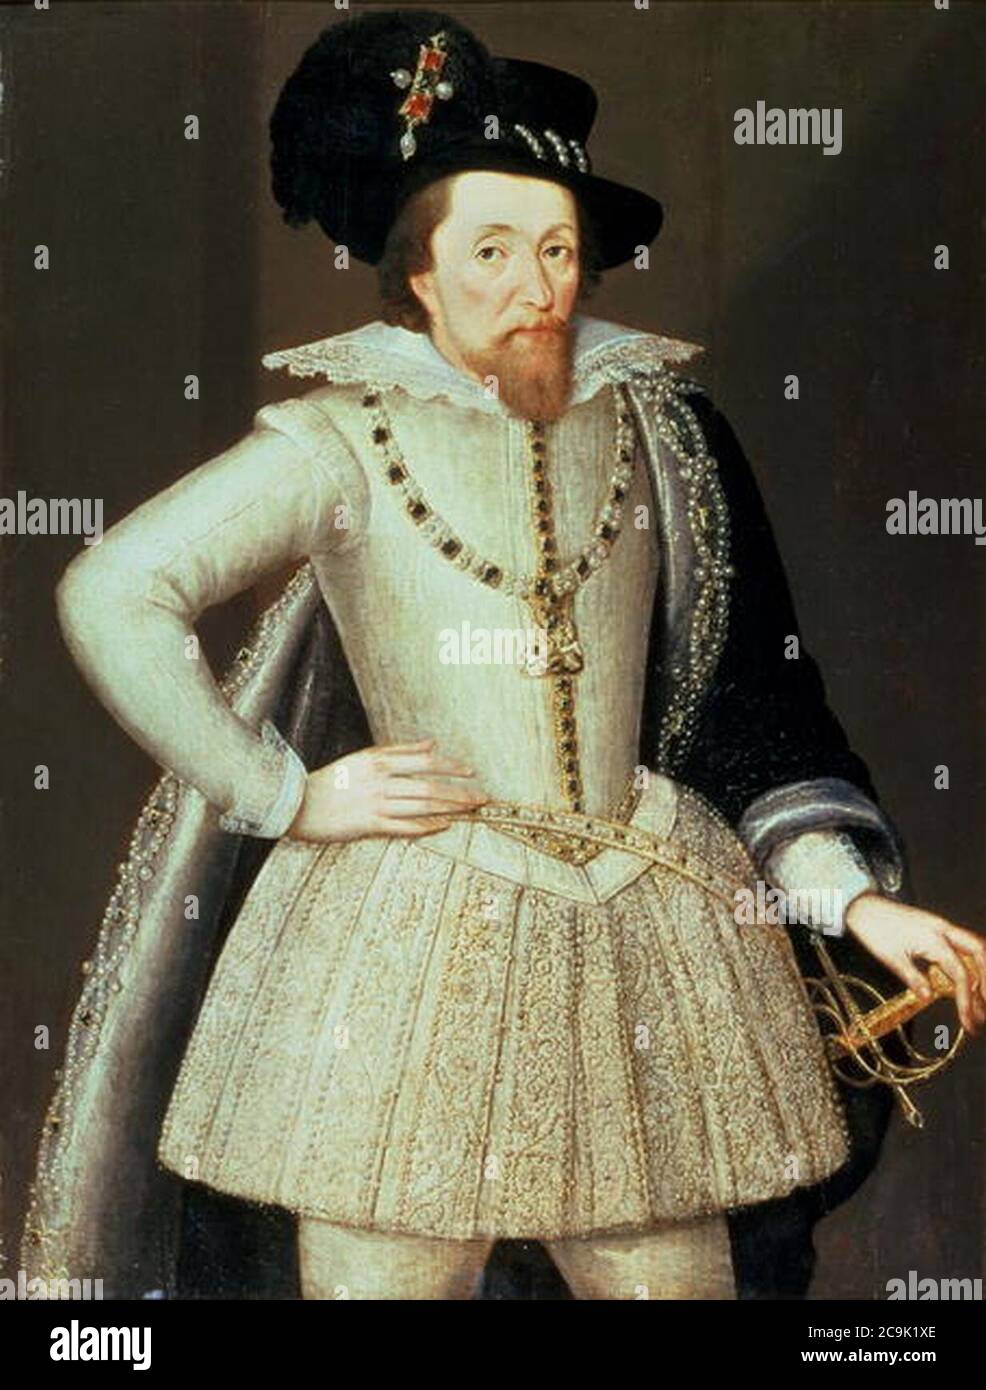 James VI and I (dressed in white). Stock Photo